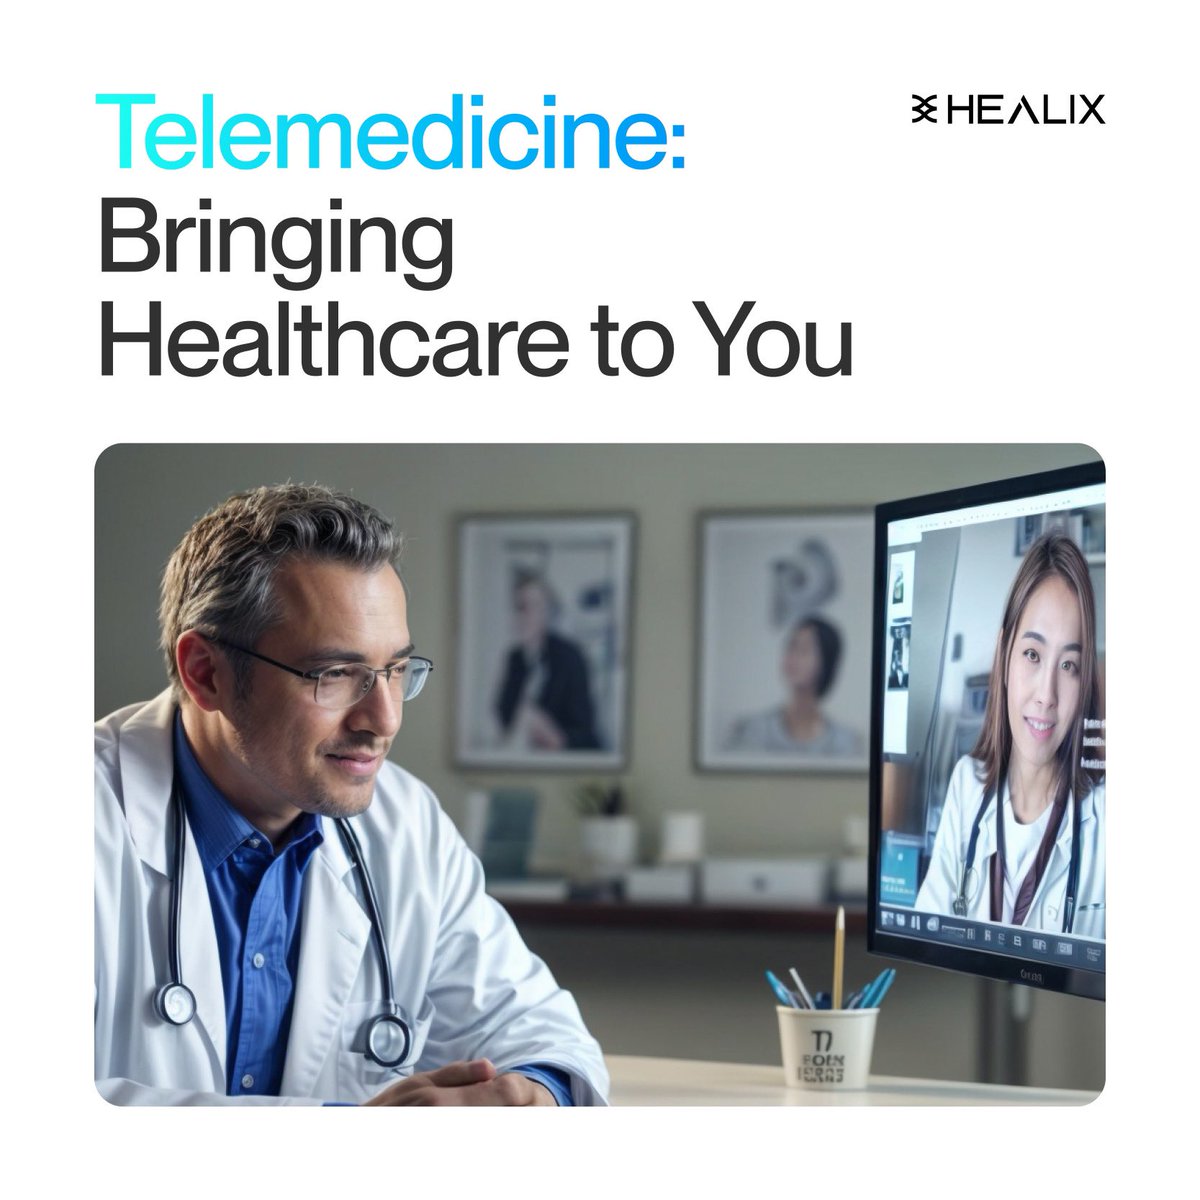 Telemedicine allows you to consult with healthcare professionals remotely, saving you time and hassle.

With Healix Protocol, we’re bringing quality #healthcare directly to your fingertips. 

Join the movement to experience the future of healthcare with #telemedicine! 🌐💉